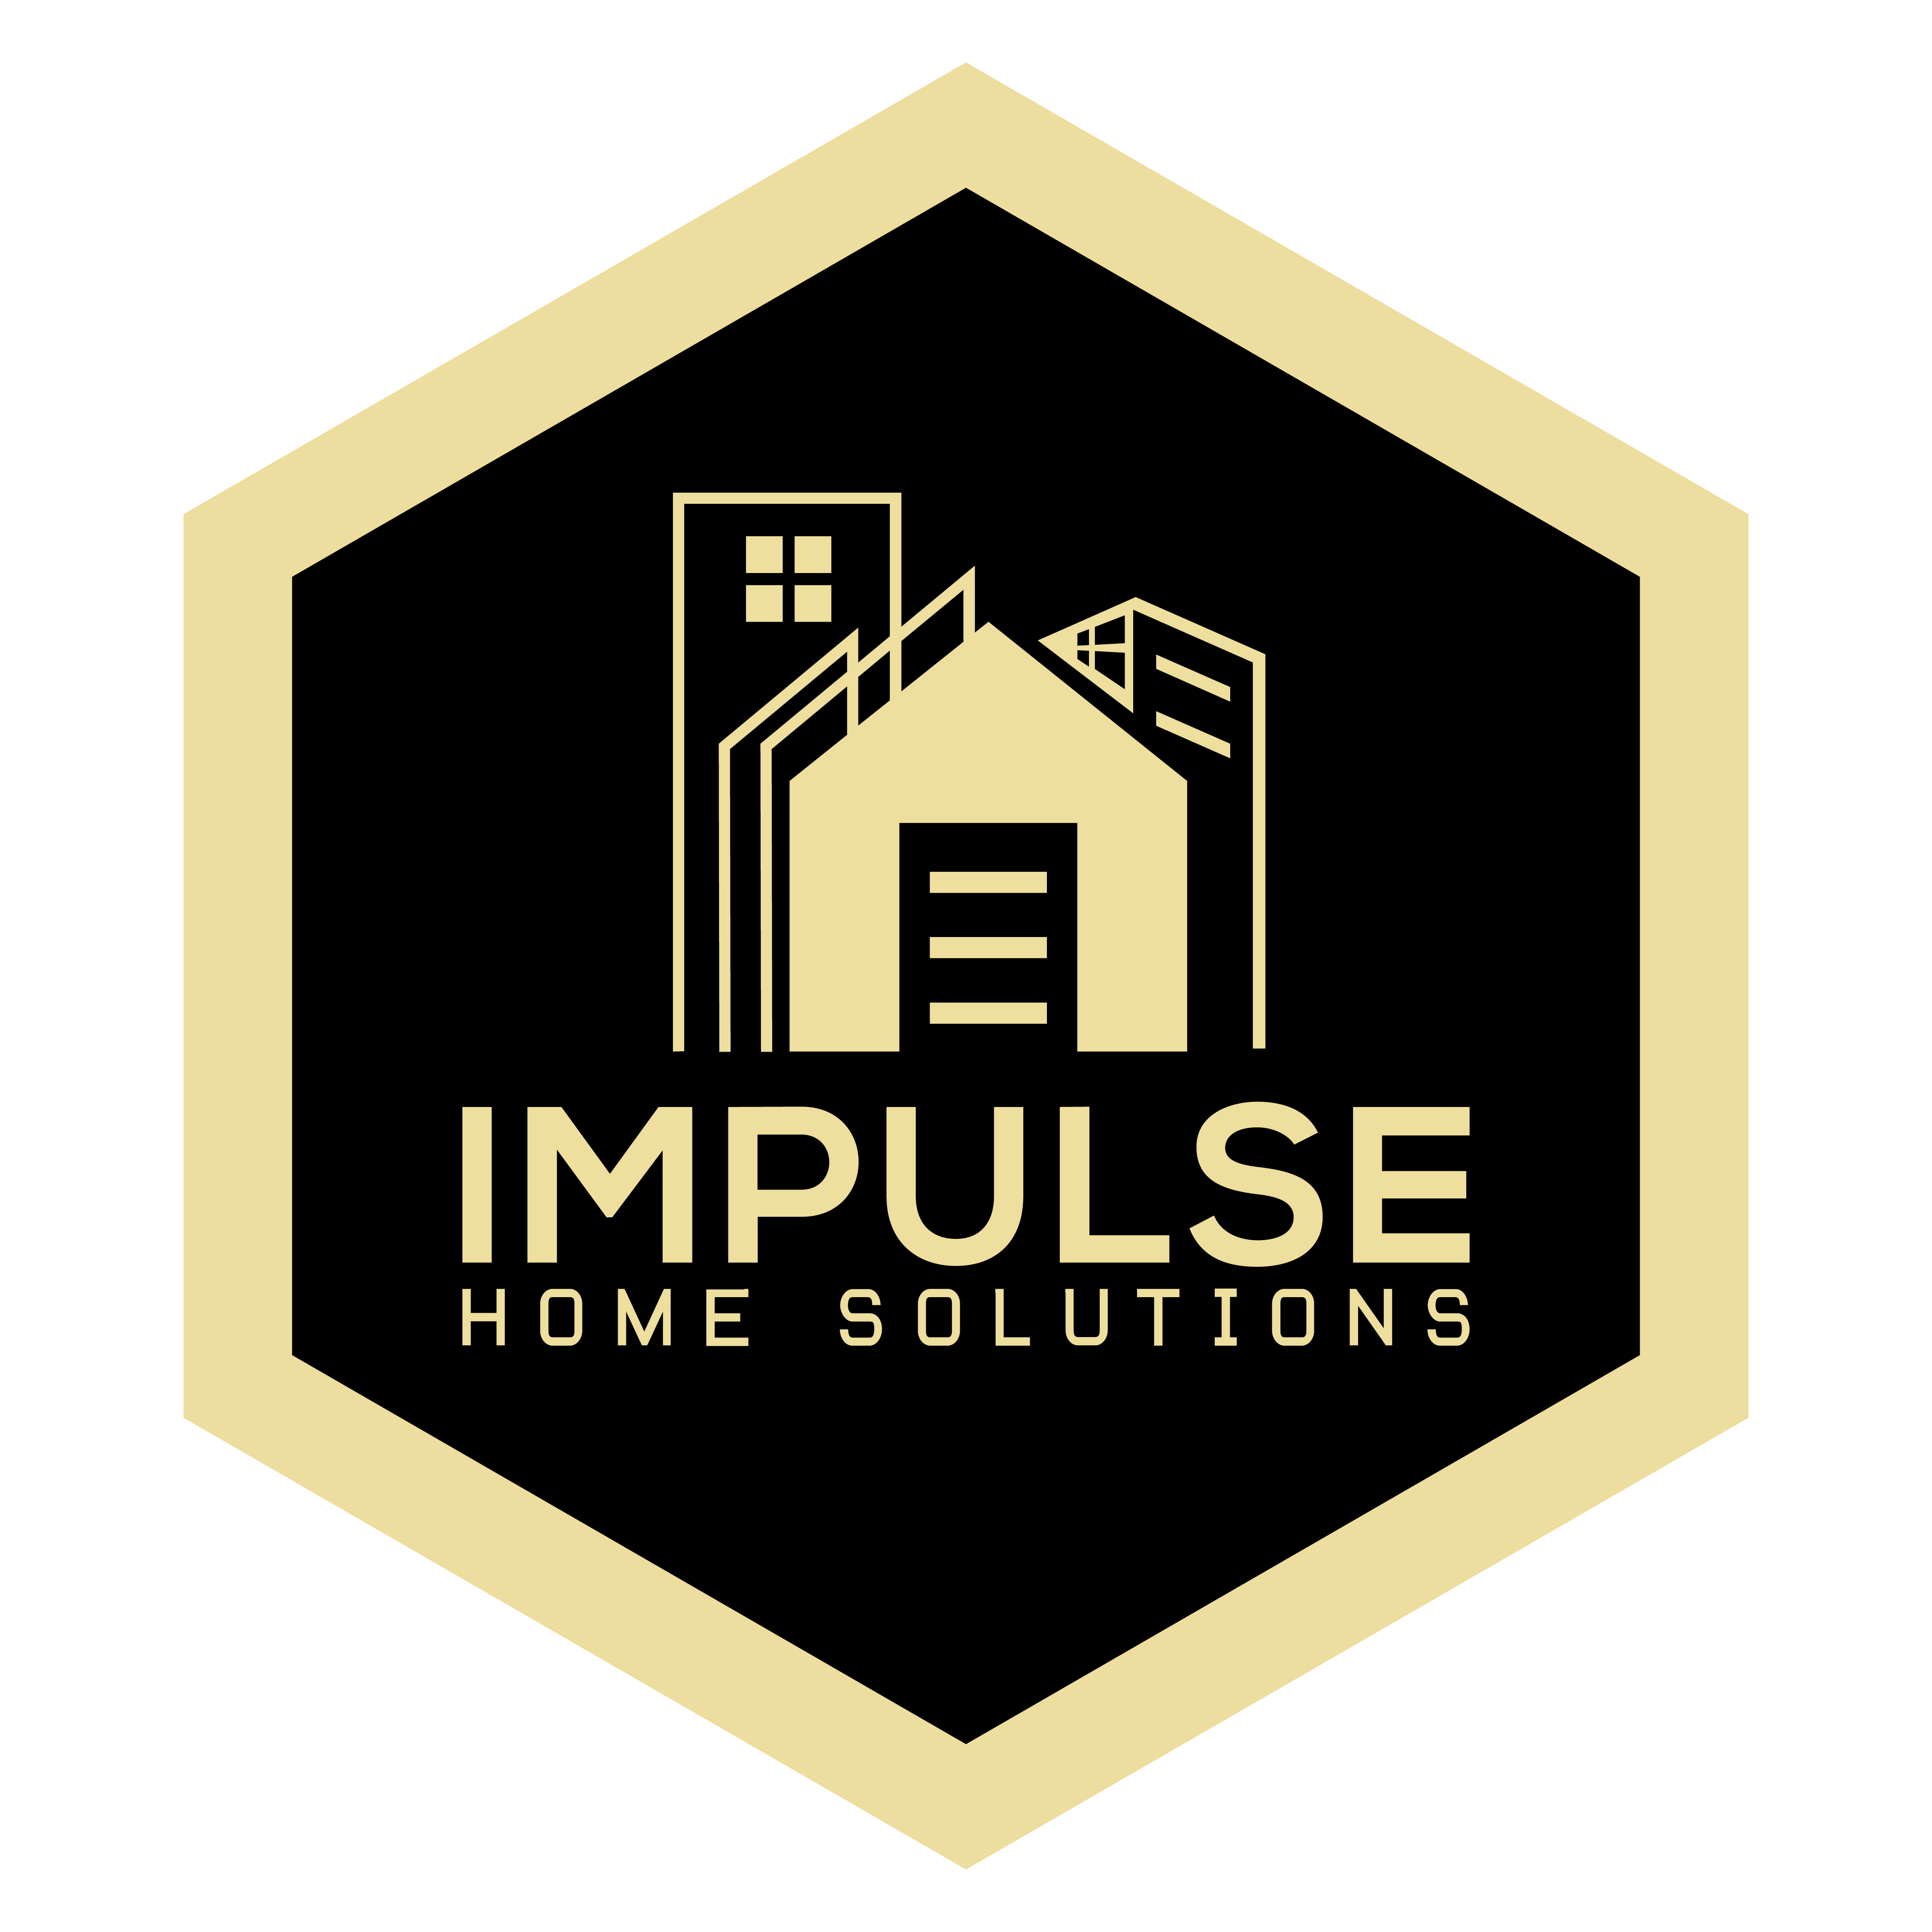 Impulse Home Solutions